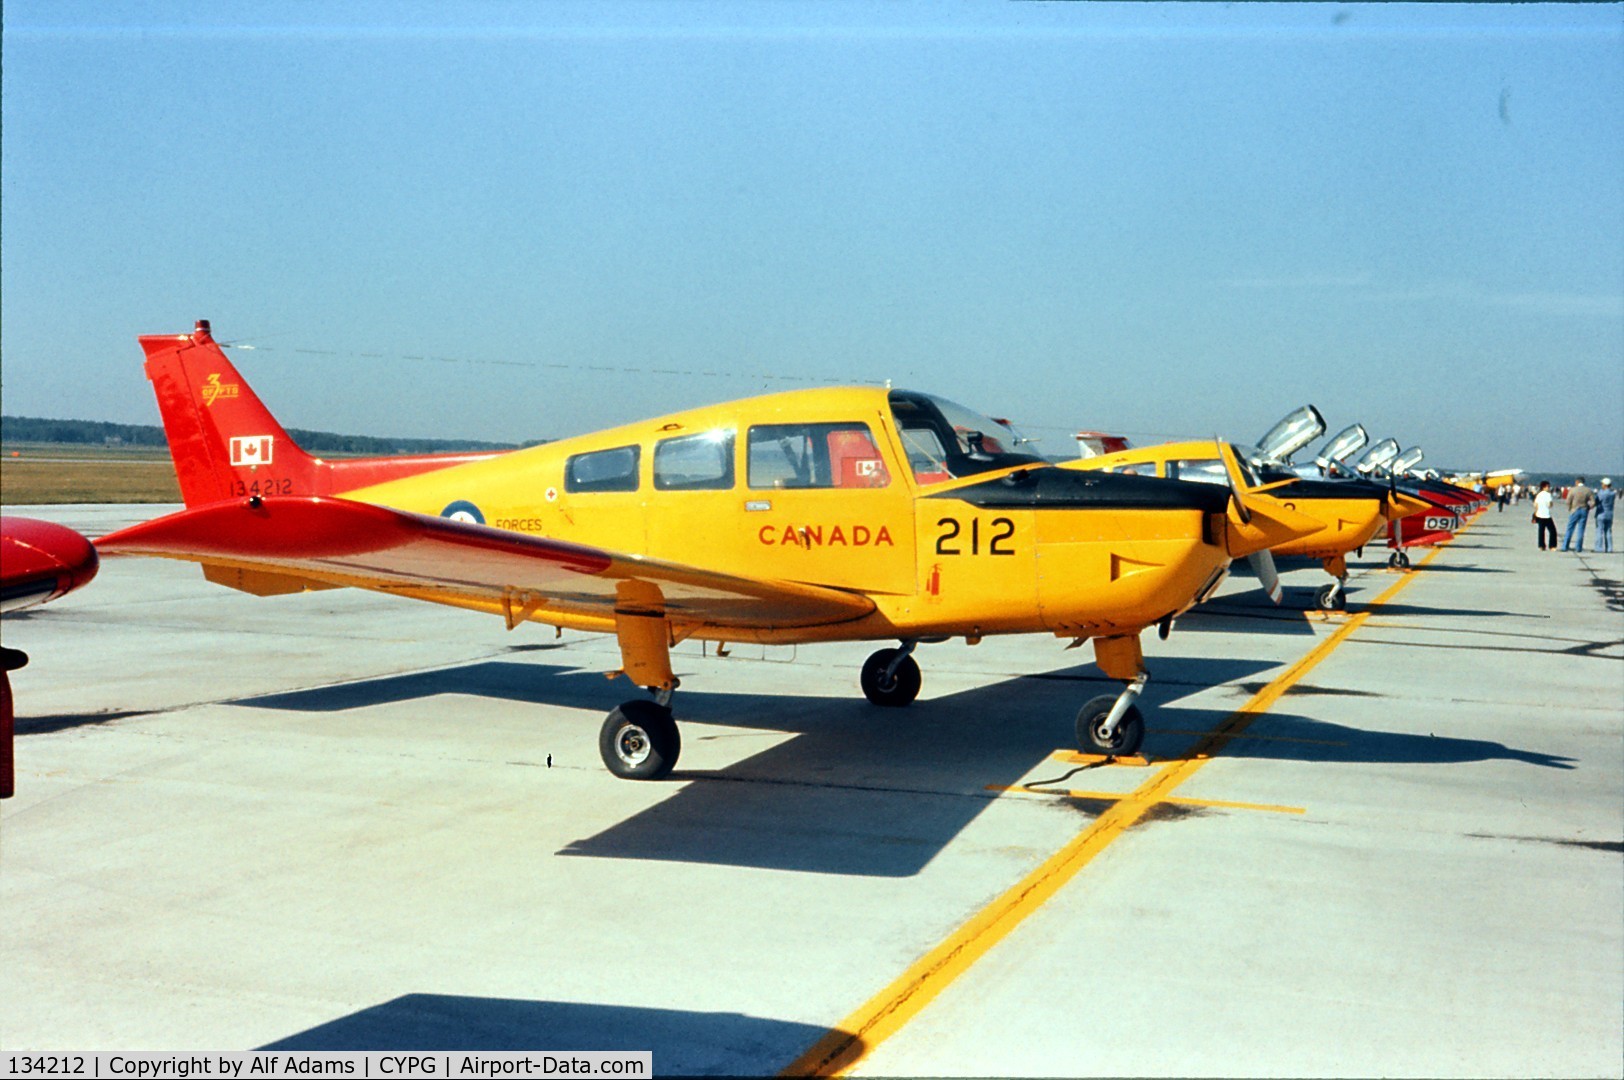 134212, Beech CT-134 Musketeer C/N M-1336, Photo shows Musketeer 134212 in 1976 when it attended the airshow at Canadian Forces Base Portage la Prairie, Manitoba, Canada.